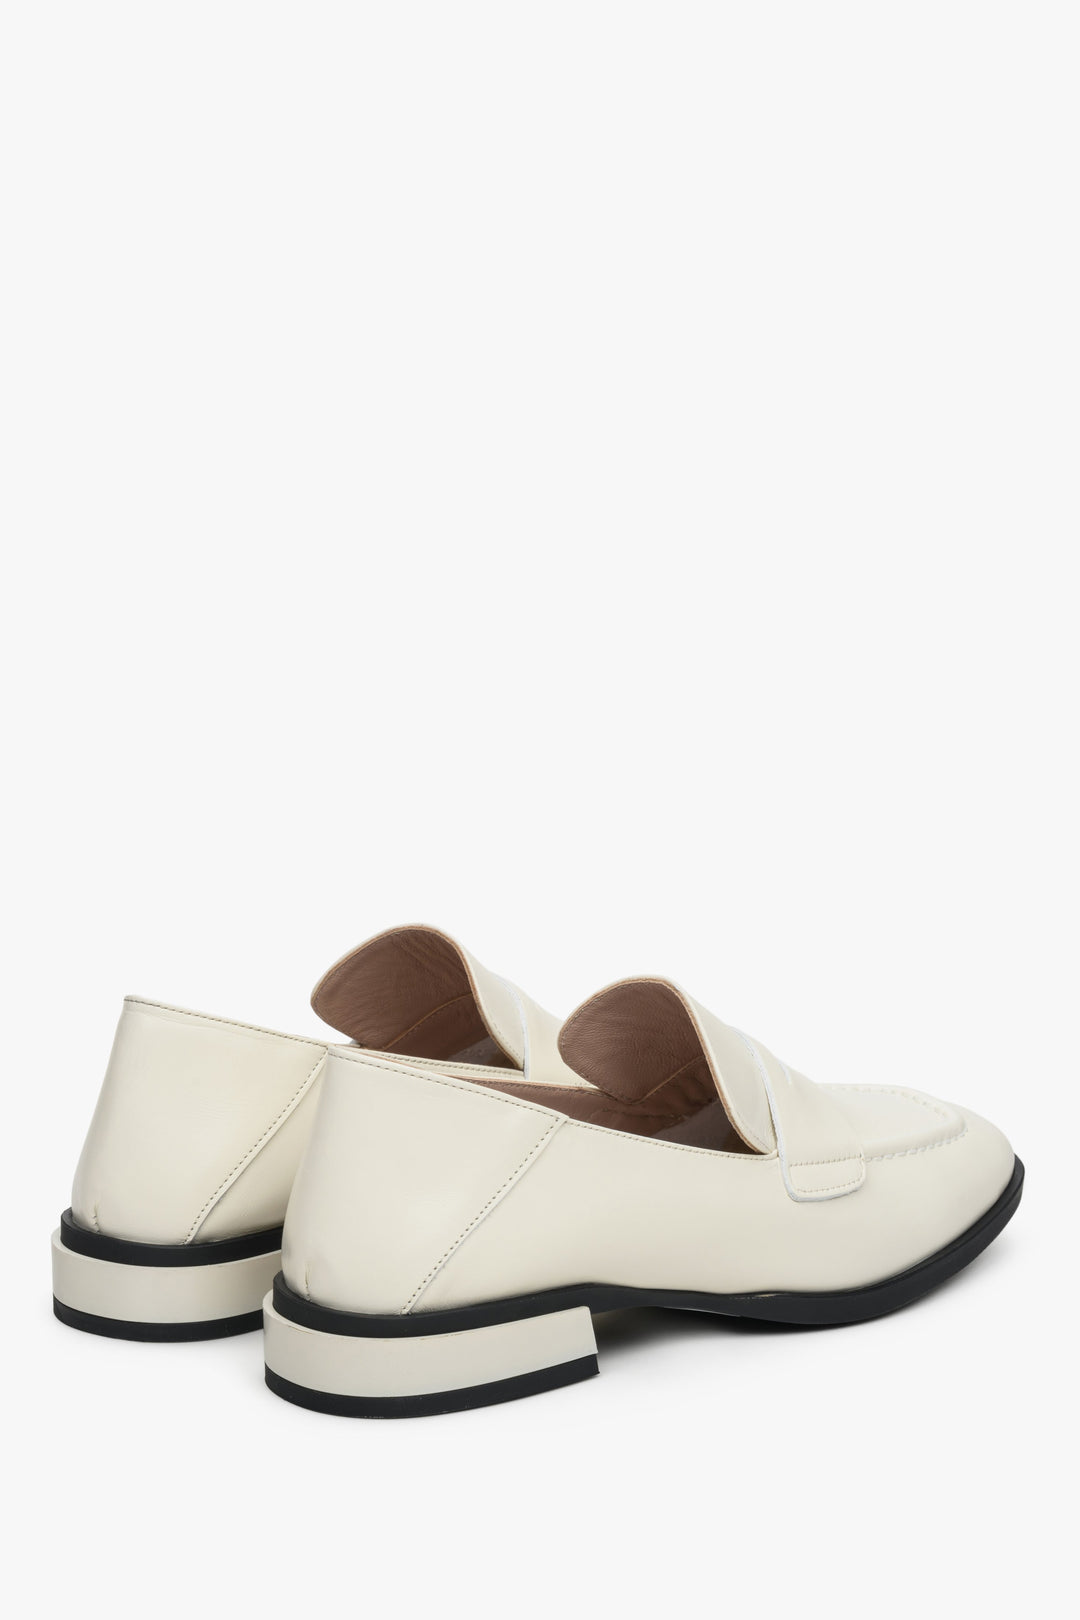 Women's white loafers made of genuine leather with a low heel - close-up on the heel and side seam.